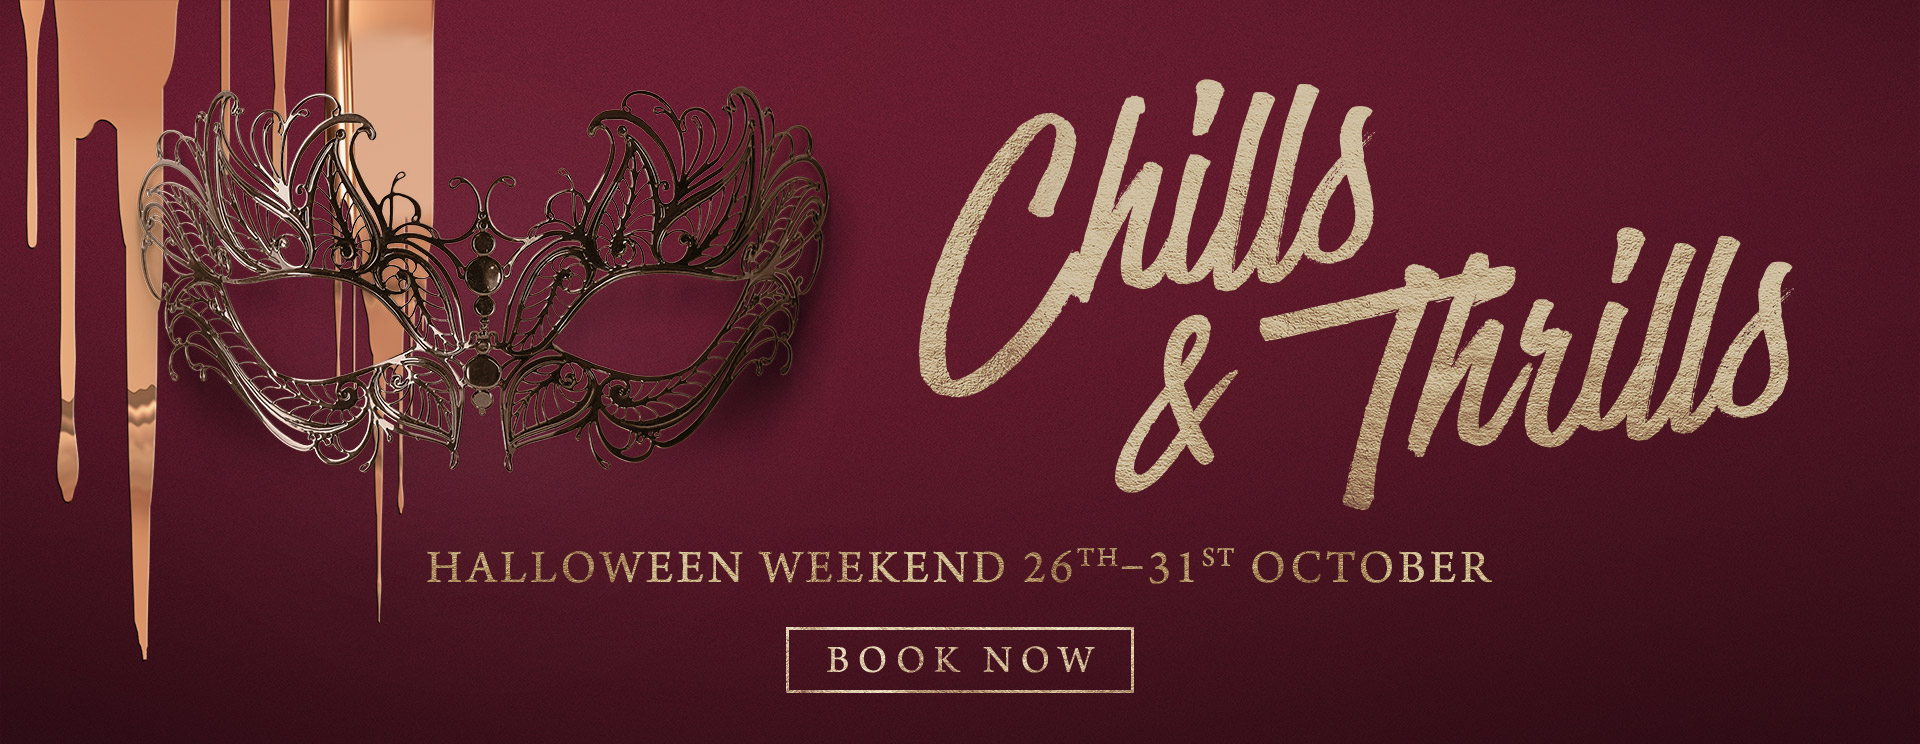 Chills & Thrills this Halloween at The Hole in the Wall